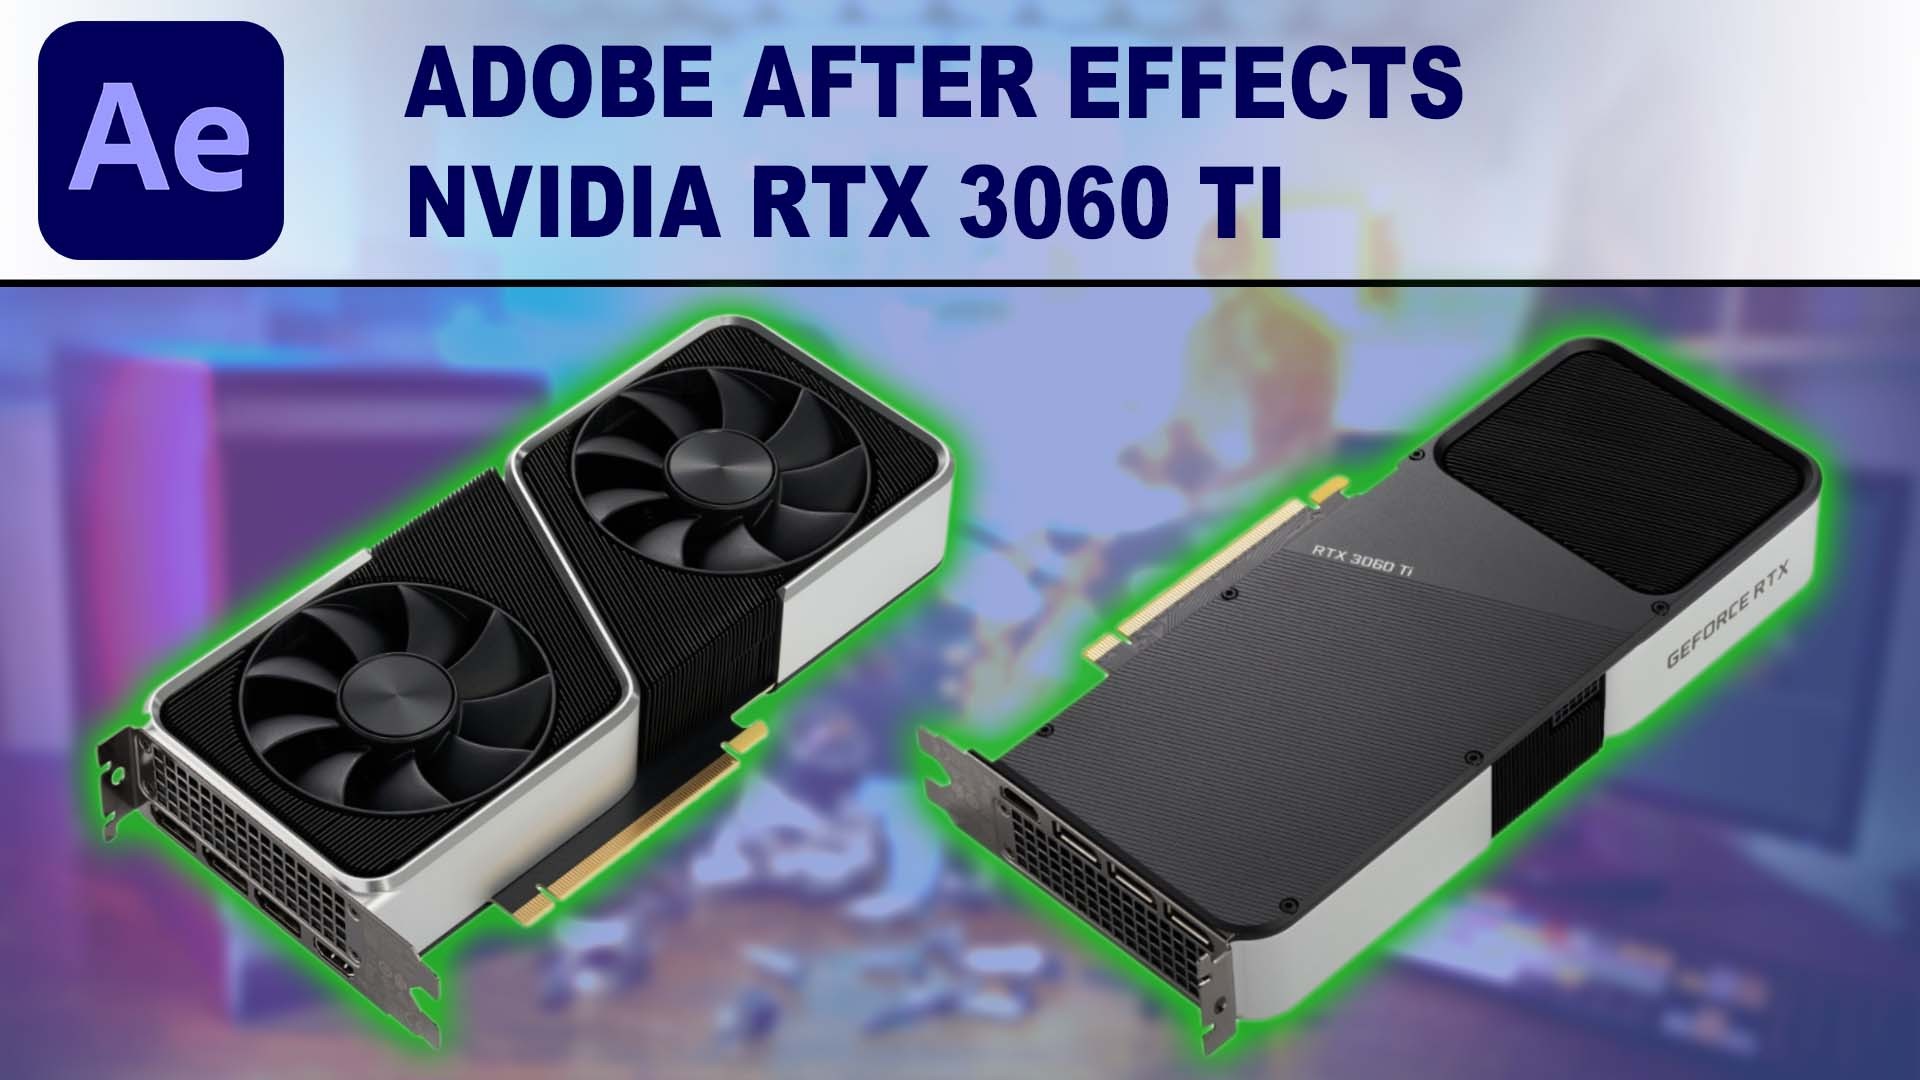 Adobe After Effects - NVIDIA GeForce RTX 3060 Ti Performance